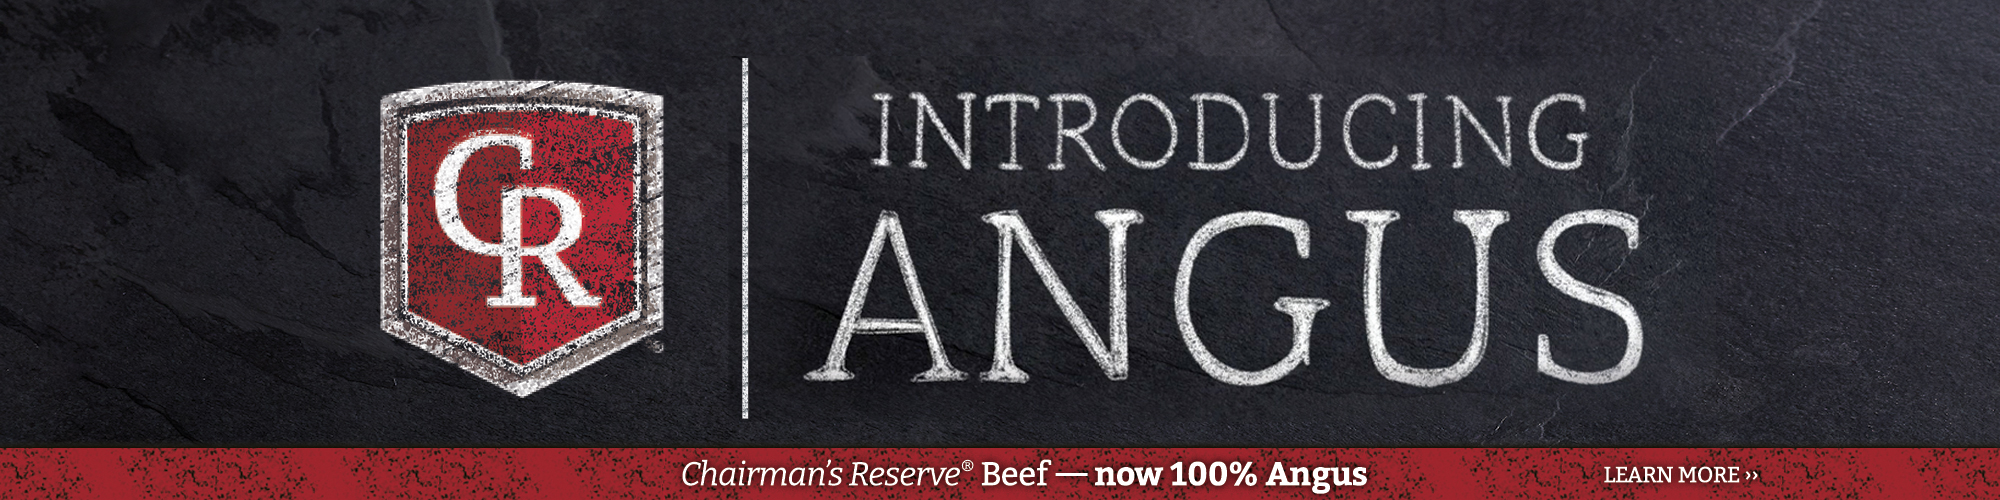 Introducing Chairman's Reserve Angus Beef